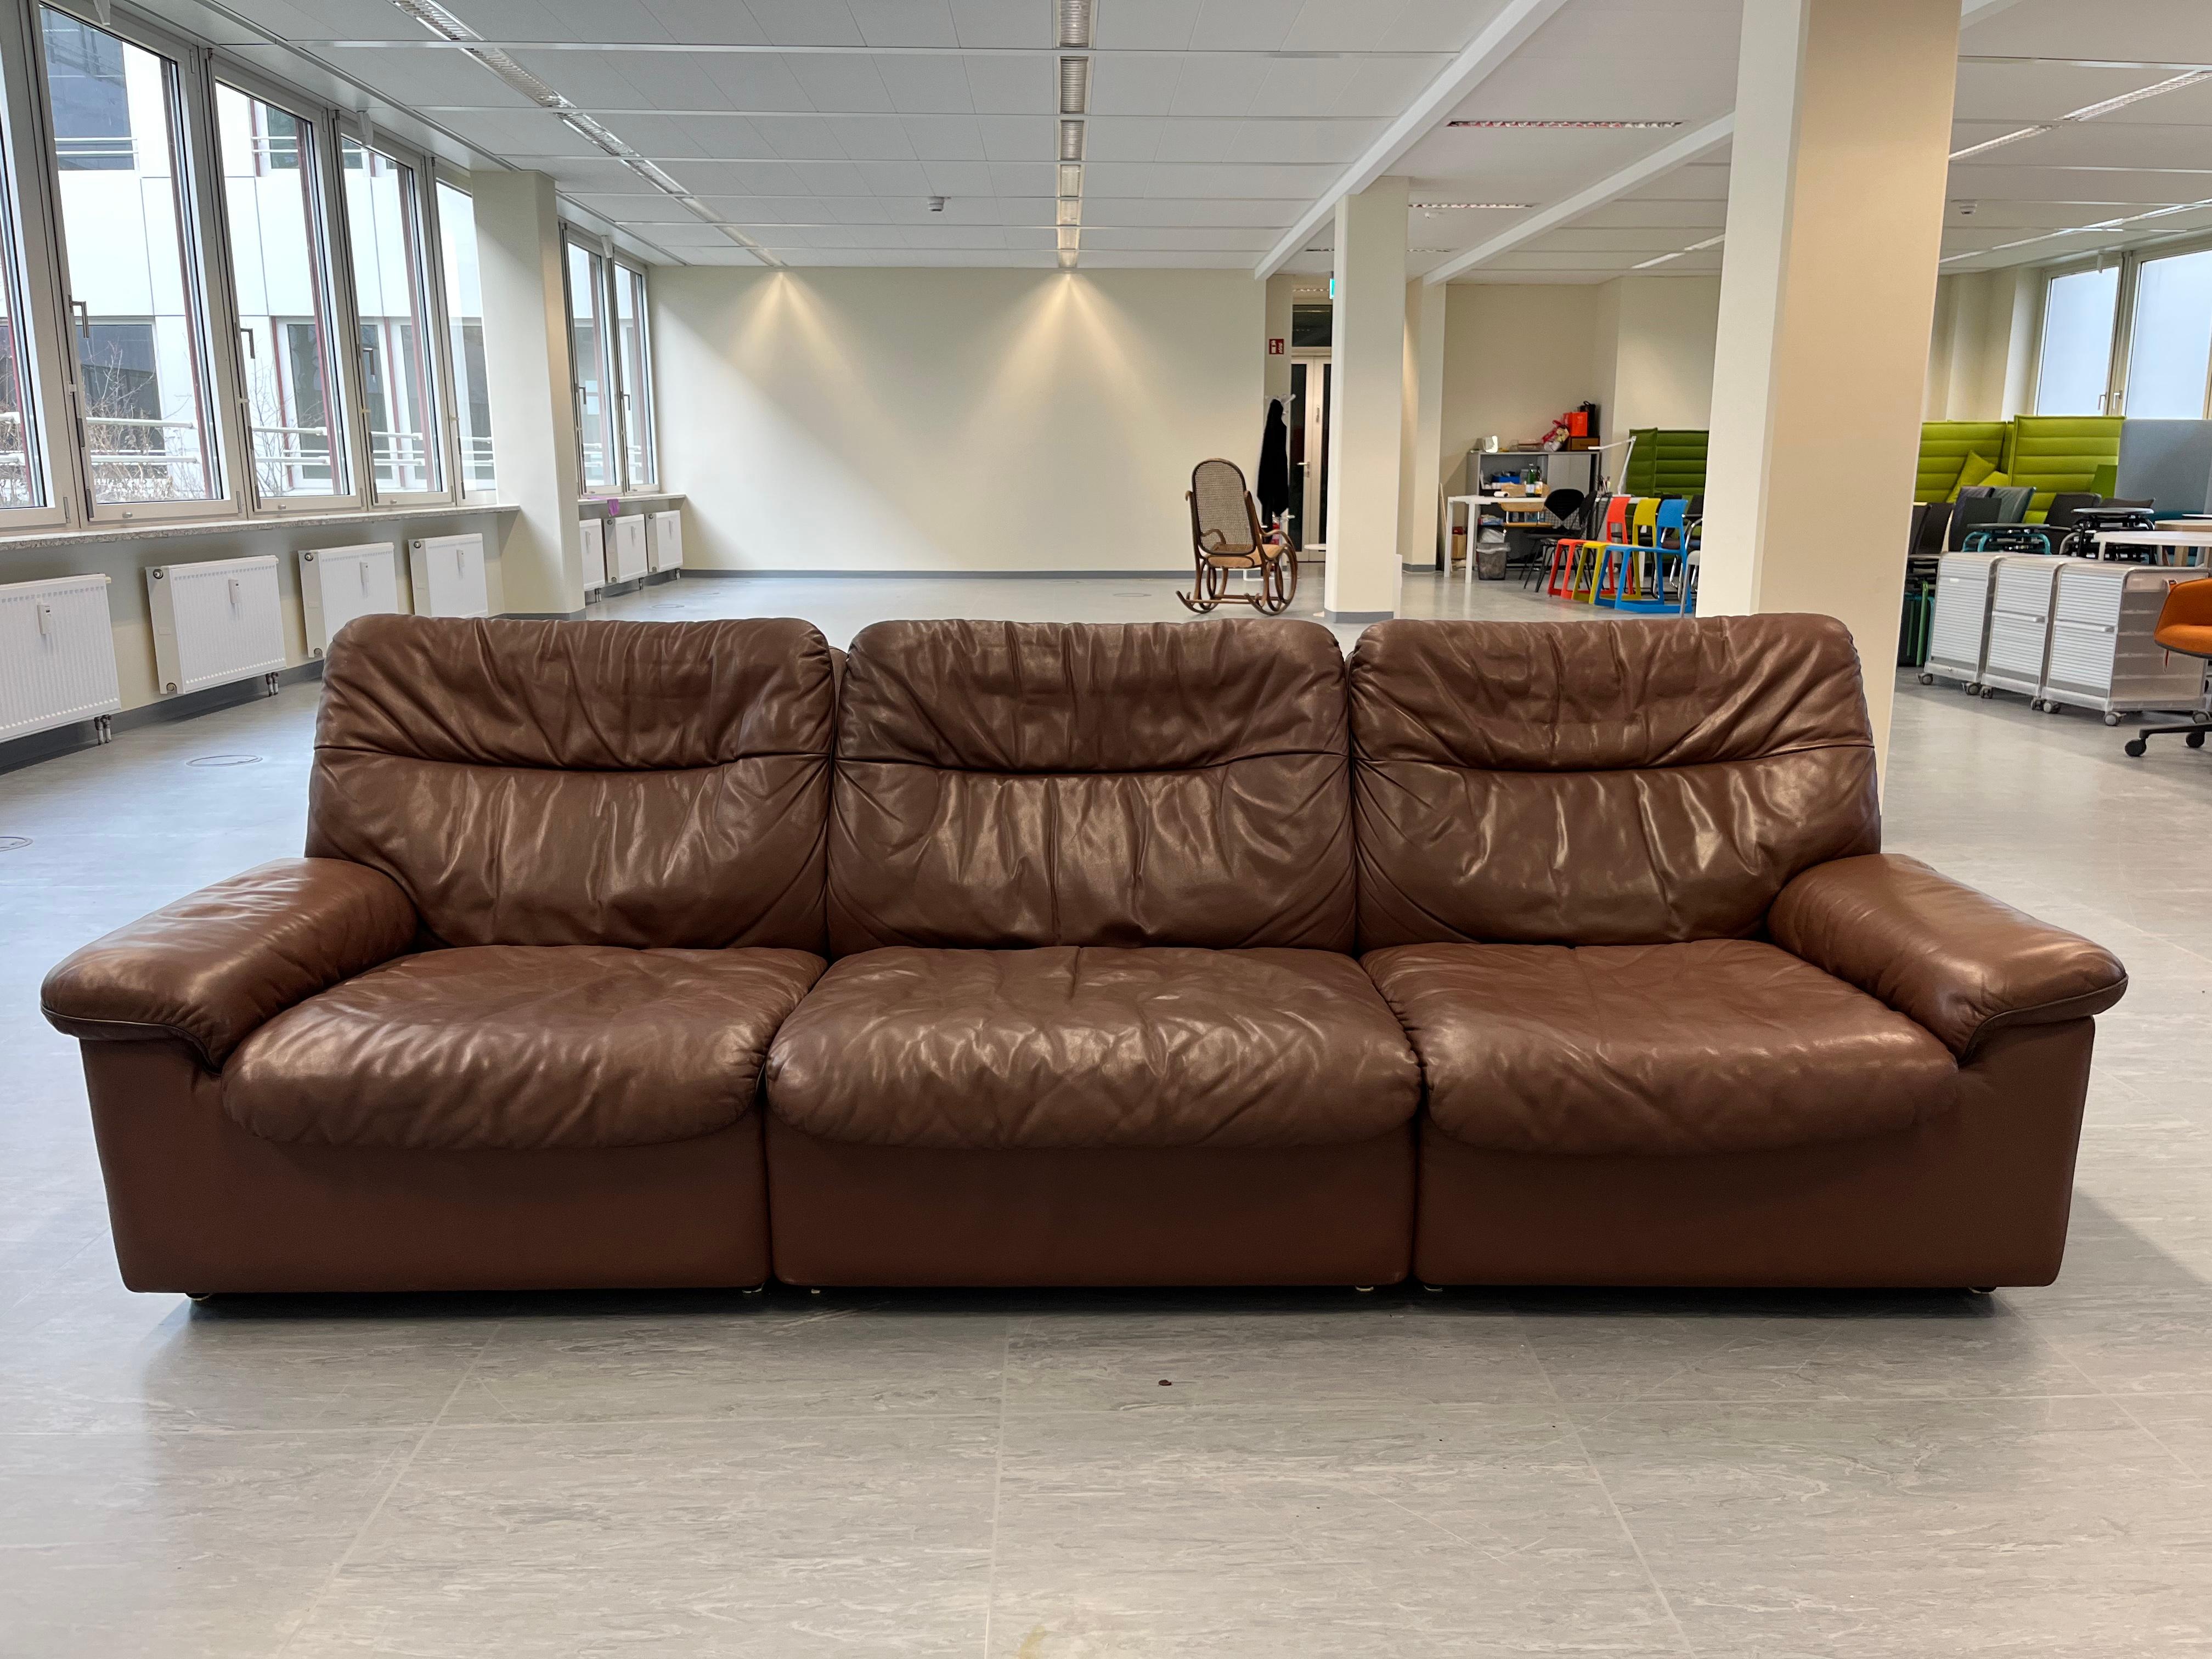 De Sede Ds 66 
3-seater / leather in almost perfect condition!
Colour: chocolate-brown.